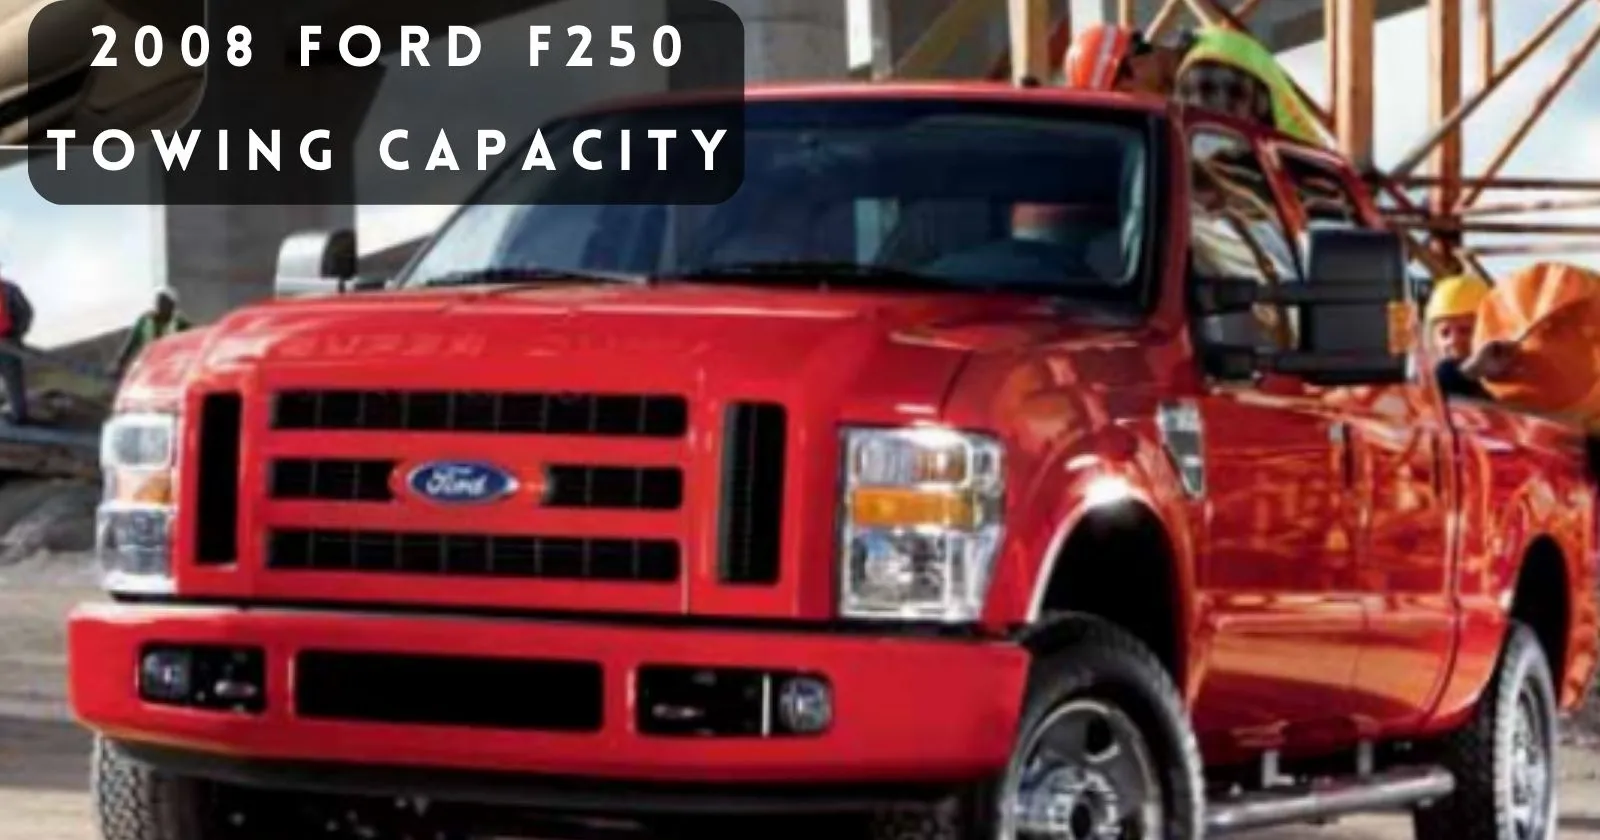 Discover the 2008 Ford F250 Towing Capacity with Charts & Guidelines